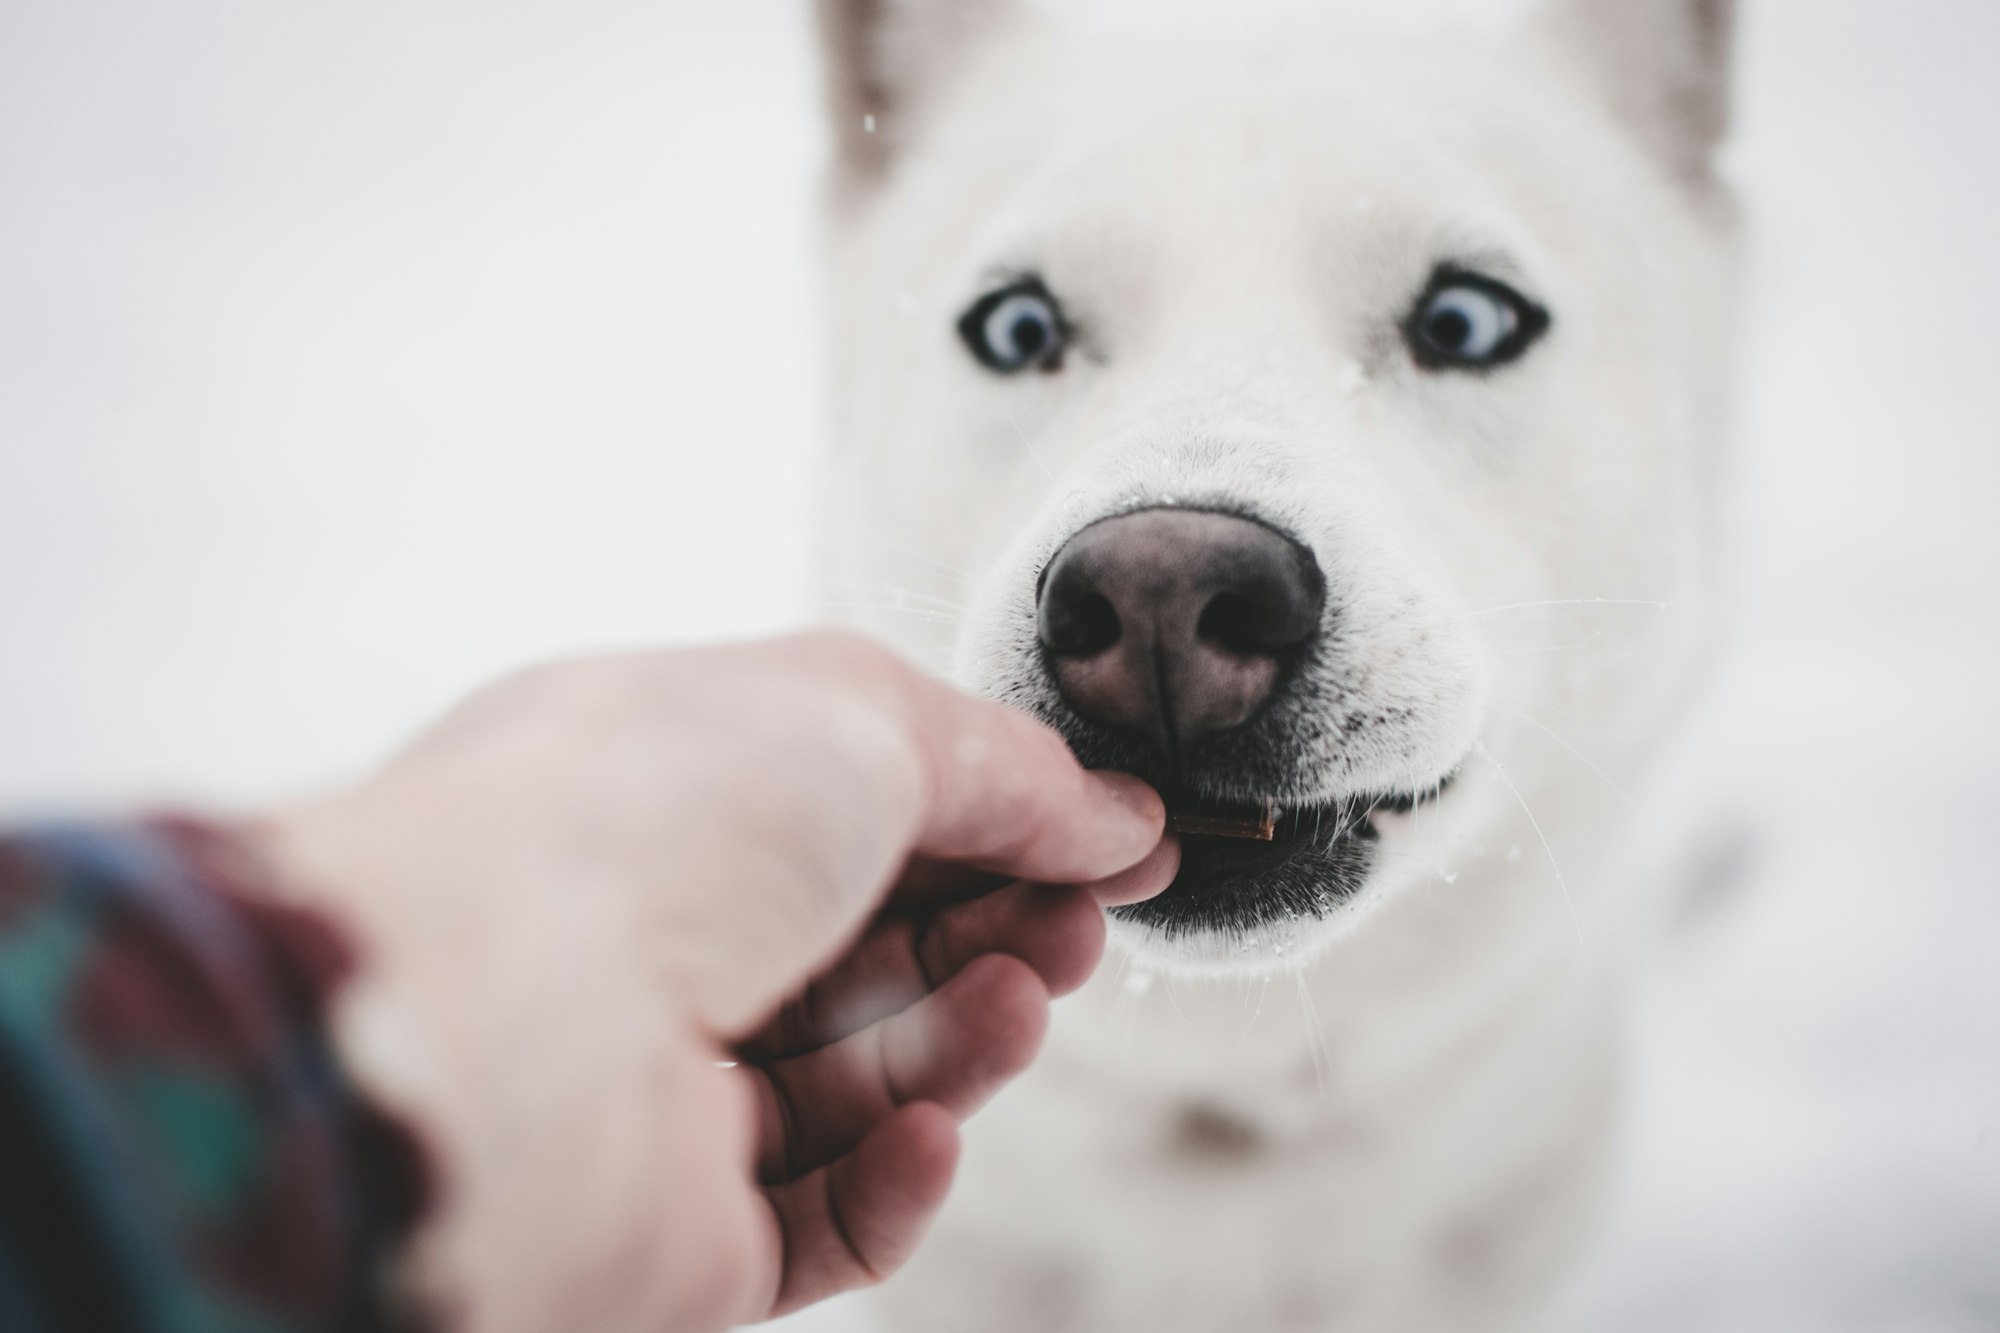 Delicious and Nutritious: 3 Homemade Dog Treat Recipes to Keep Your Pup Happy and Healthy